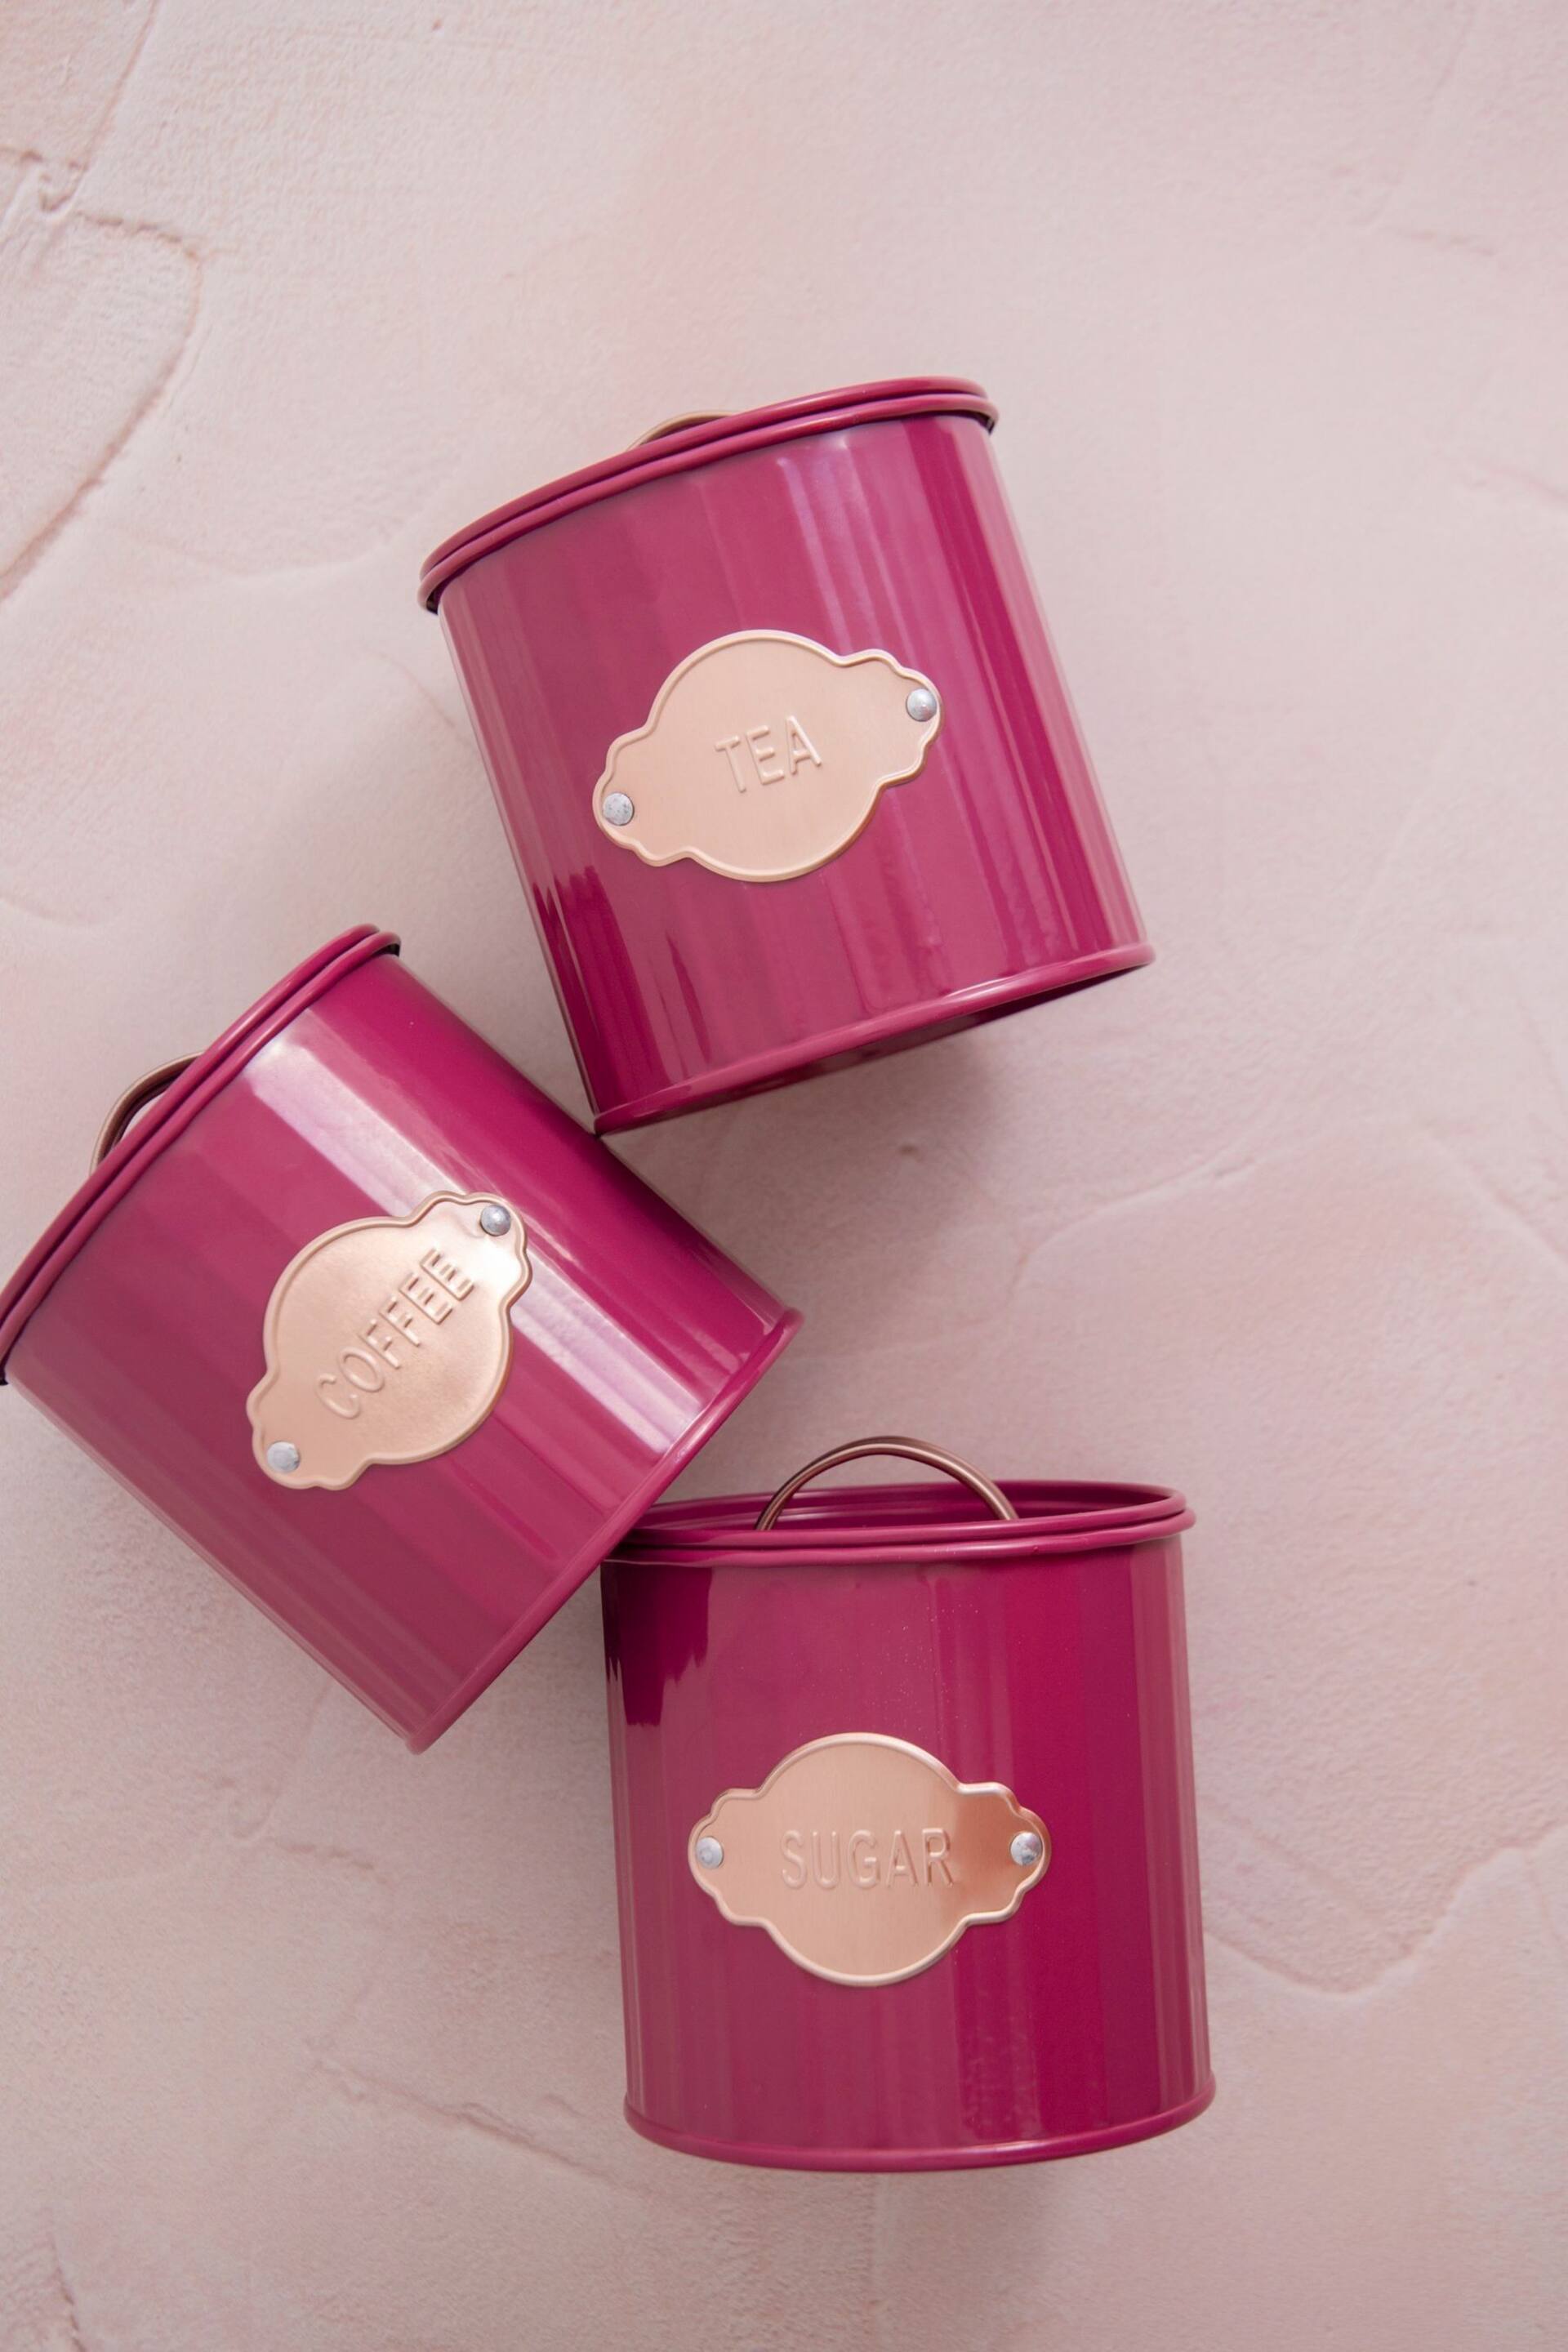 Kitchencraft Burgundy 3 Pieces Storage Canisters - Image 2 of 3